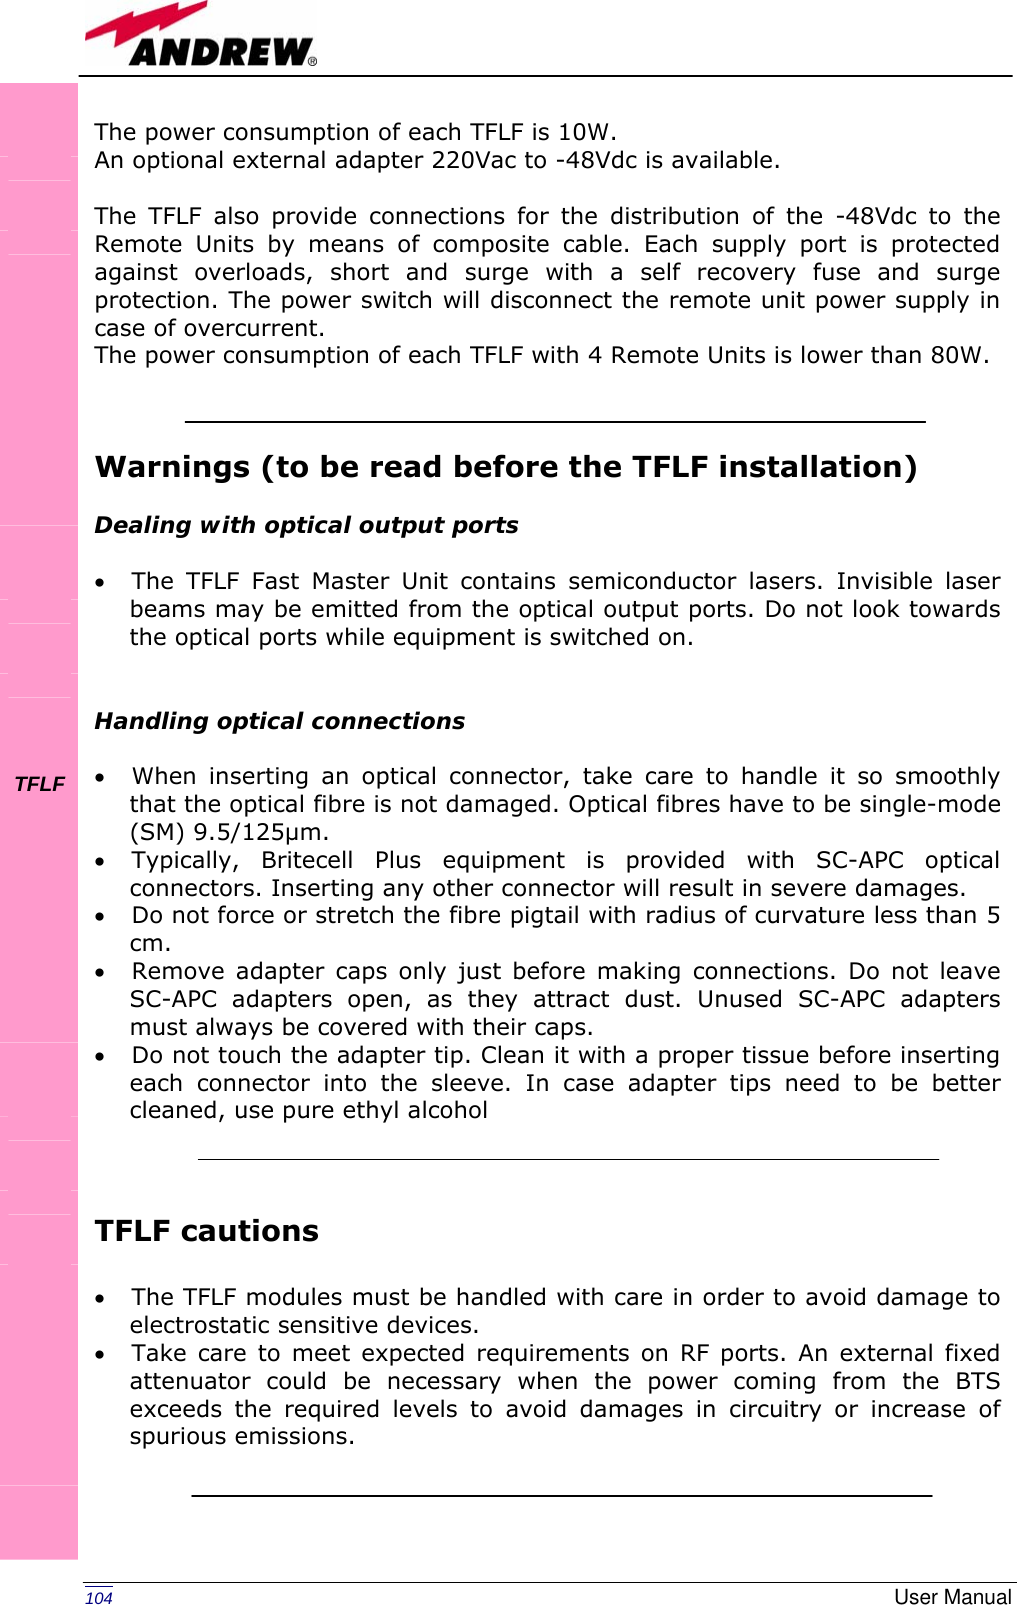   104  User ManualThe power consumption of each TFLF is 10W. An optional external adapter 220Vac to -48Vdc is available.  The TFLF also provide connections for the distribution of the -48Vdc to the Remote Units by means of composite cable. Each supply port is protected against overloads, short and surge with a self recovery fuse and surge protection. The power switch will disconnect the remote unit power supply in case of overcurrent. The power consumption of each TFLF with 4 Remote Units is lower than 80W.    Warnings (to be read before the TFLF installation)  Dealing with optical output ports  • The TFLF Fast Master Unit contains semiconductor lasers. Invisible laser beams may be emitted from the optical output ports. Do not look towards the optical ports while equipment is switched on.   Handling optical connections  • When inserting an optical connector, take care to handle it so smoothly that the optical fibre is not damaged. Optical fibres have to be single-mode (SM) 9.5/125µm. • Typically, Britecell Plus equipment is provided with SC-APC optical connectors. Inserting any other connector will result in severe damages.  • Do not force or stretch the fibre pigtail with radius of curvature less than 5 cm. • Remove adapter caps only just before making connections. Do not leave SC-APC adapters open, as they attract dust. Unused SC-APC adapters must always be covered with their caps. • Do not touch the adapter tip. Clean it with a proper tissue before inserting each connector into the sleeve. In case adapter tips need to be better cleaned, use pure ethyl alcohol    TFLF cautions  • The TFLF modules must be handled with care in order to avoid damage to electrostatic sensitive devices. • Take care to meet expected requirements on RF ports. An external fixed attenuator could be necessary when the power coming from the BTS exceeds the required levels to avoid damages in circuitry or increase of spurious emissions.               TFLF           